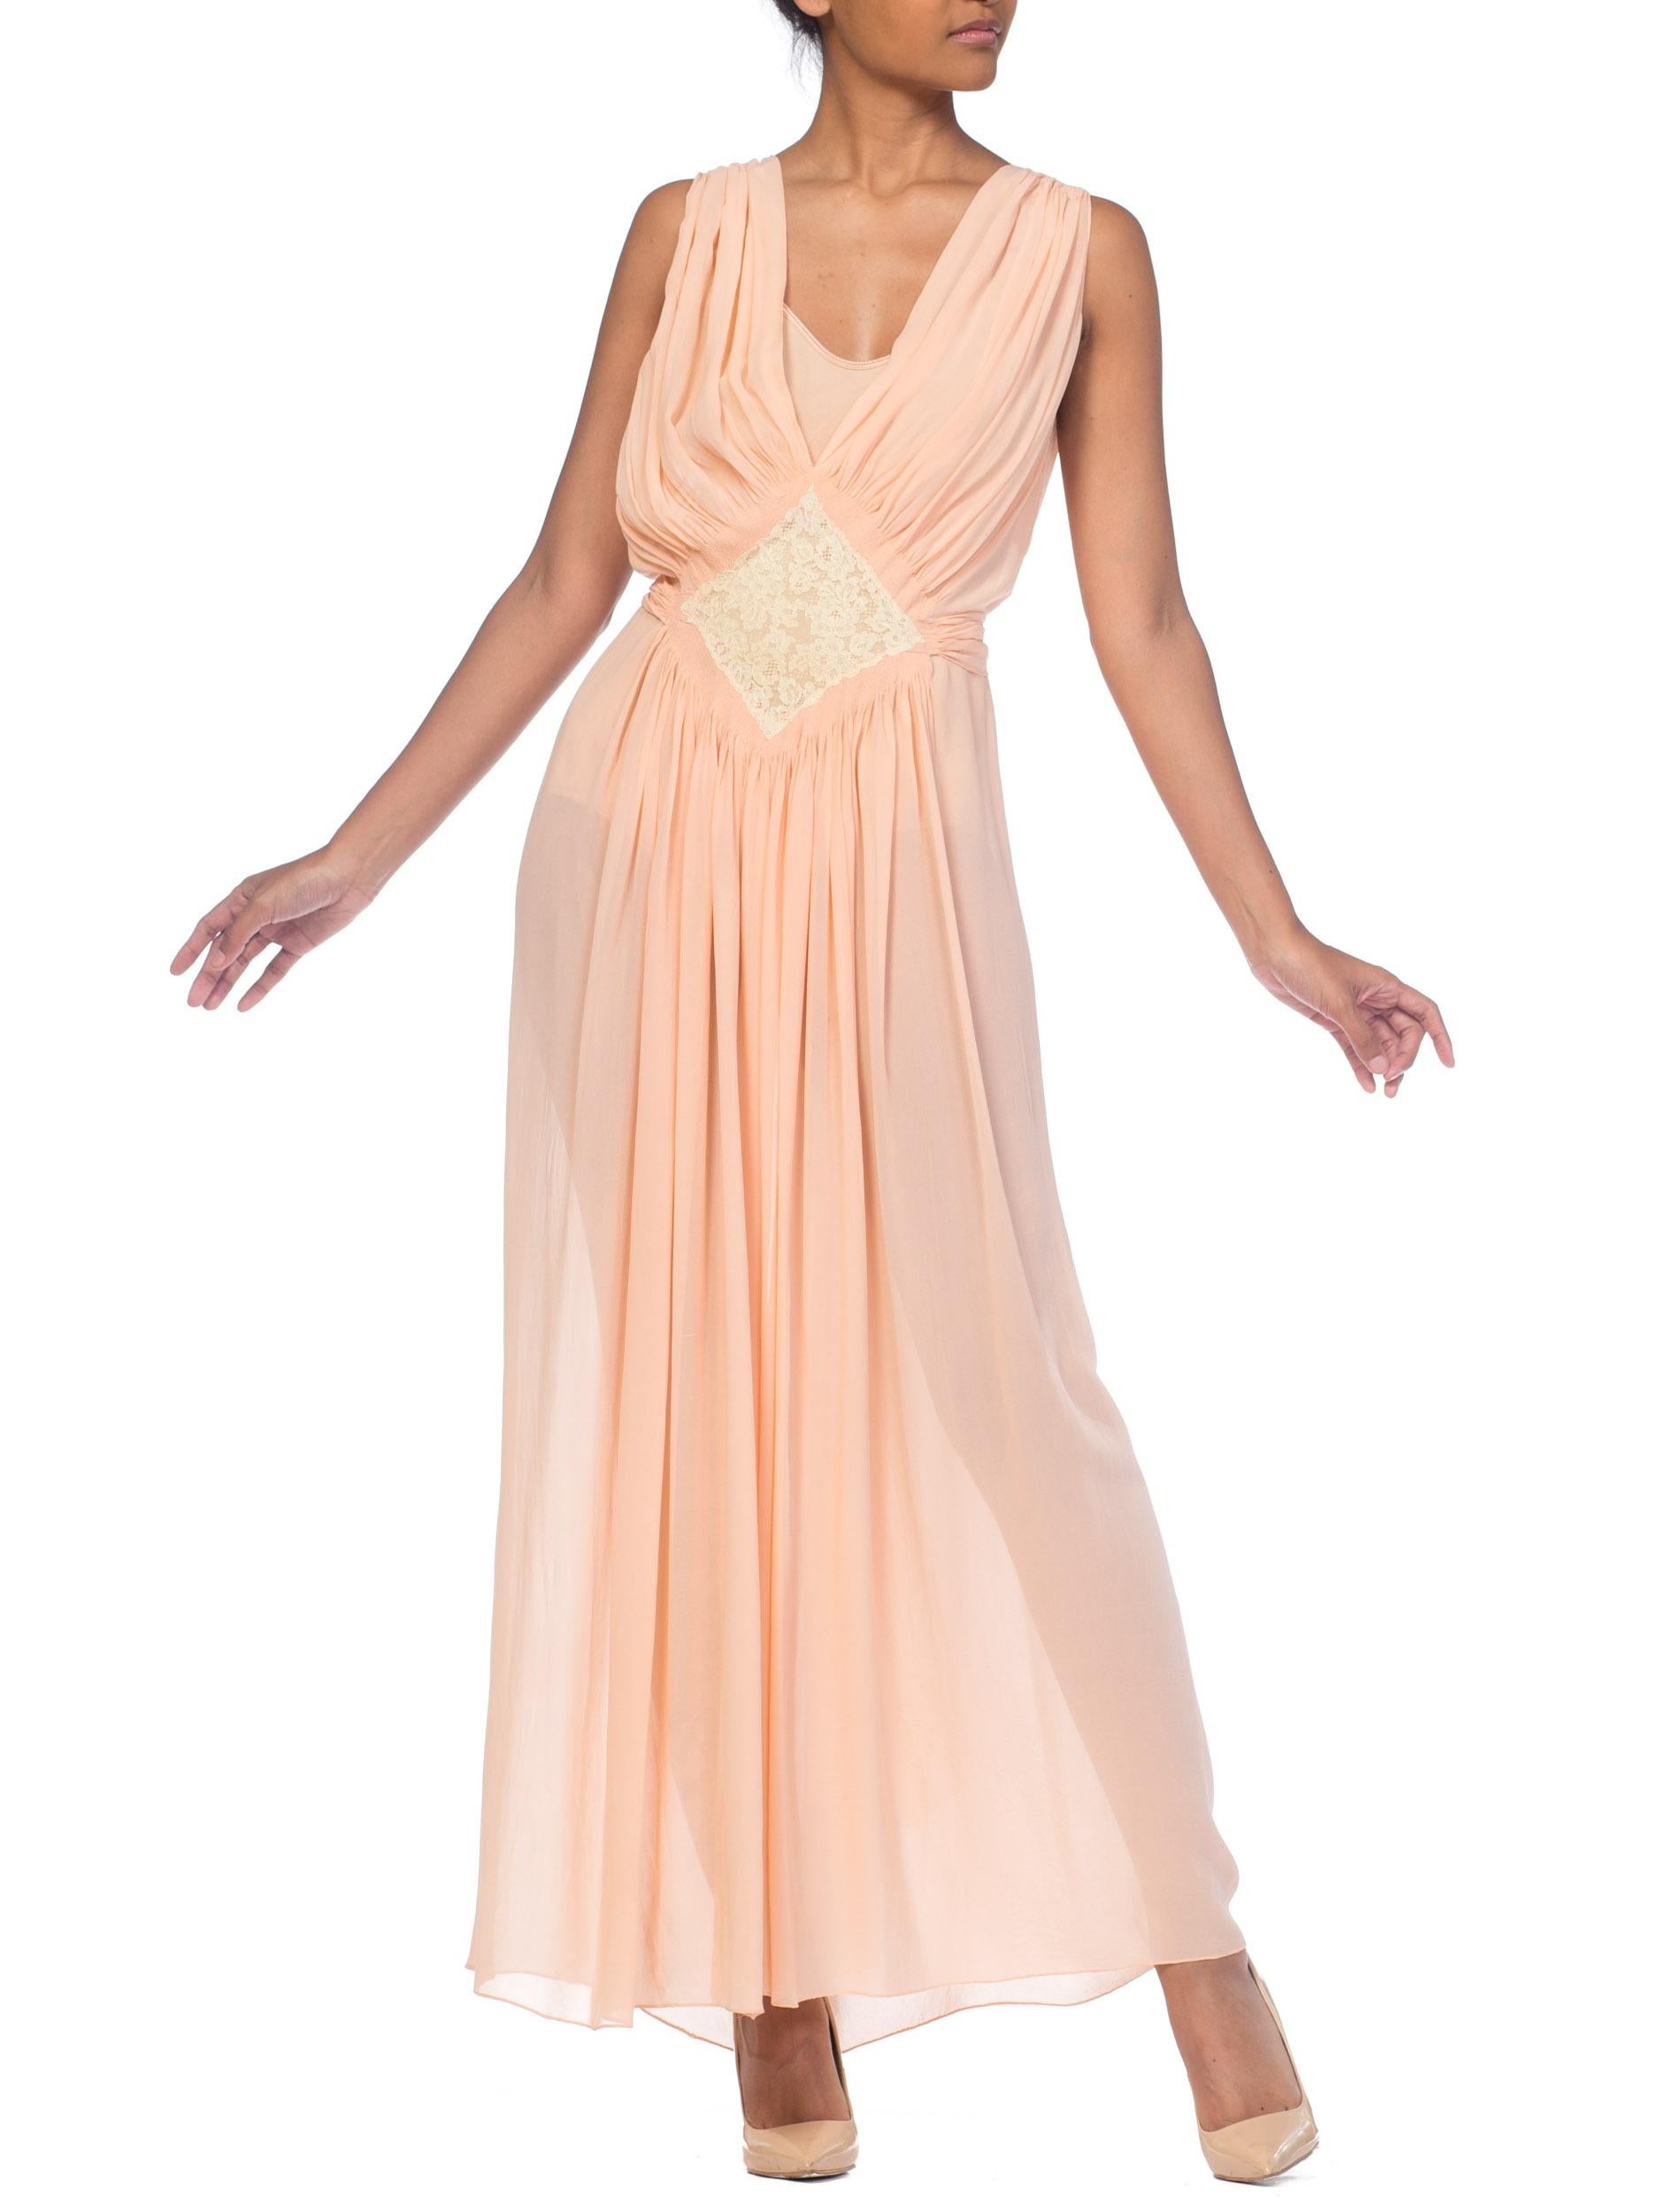 Couture Sheer Silk Chiffon 1930s Negligee With Lace 5